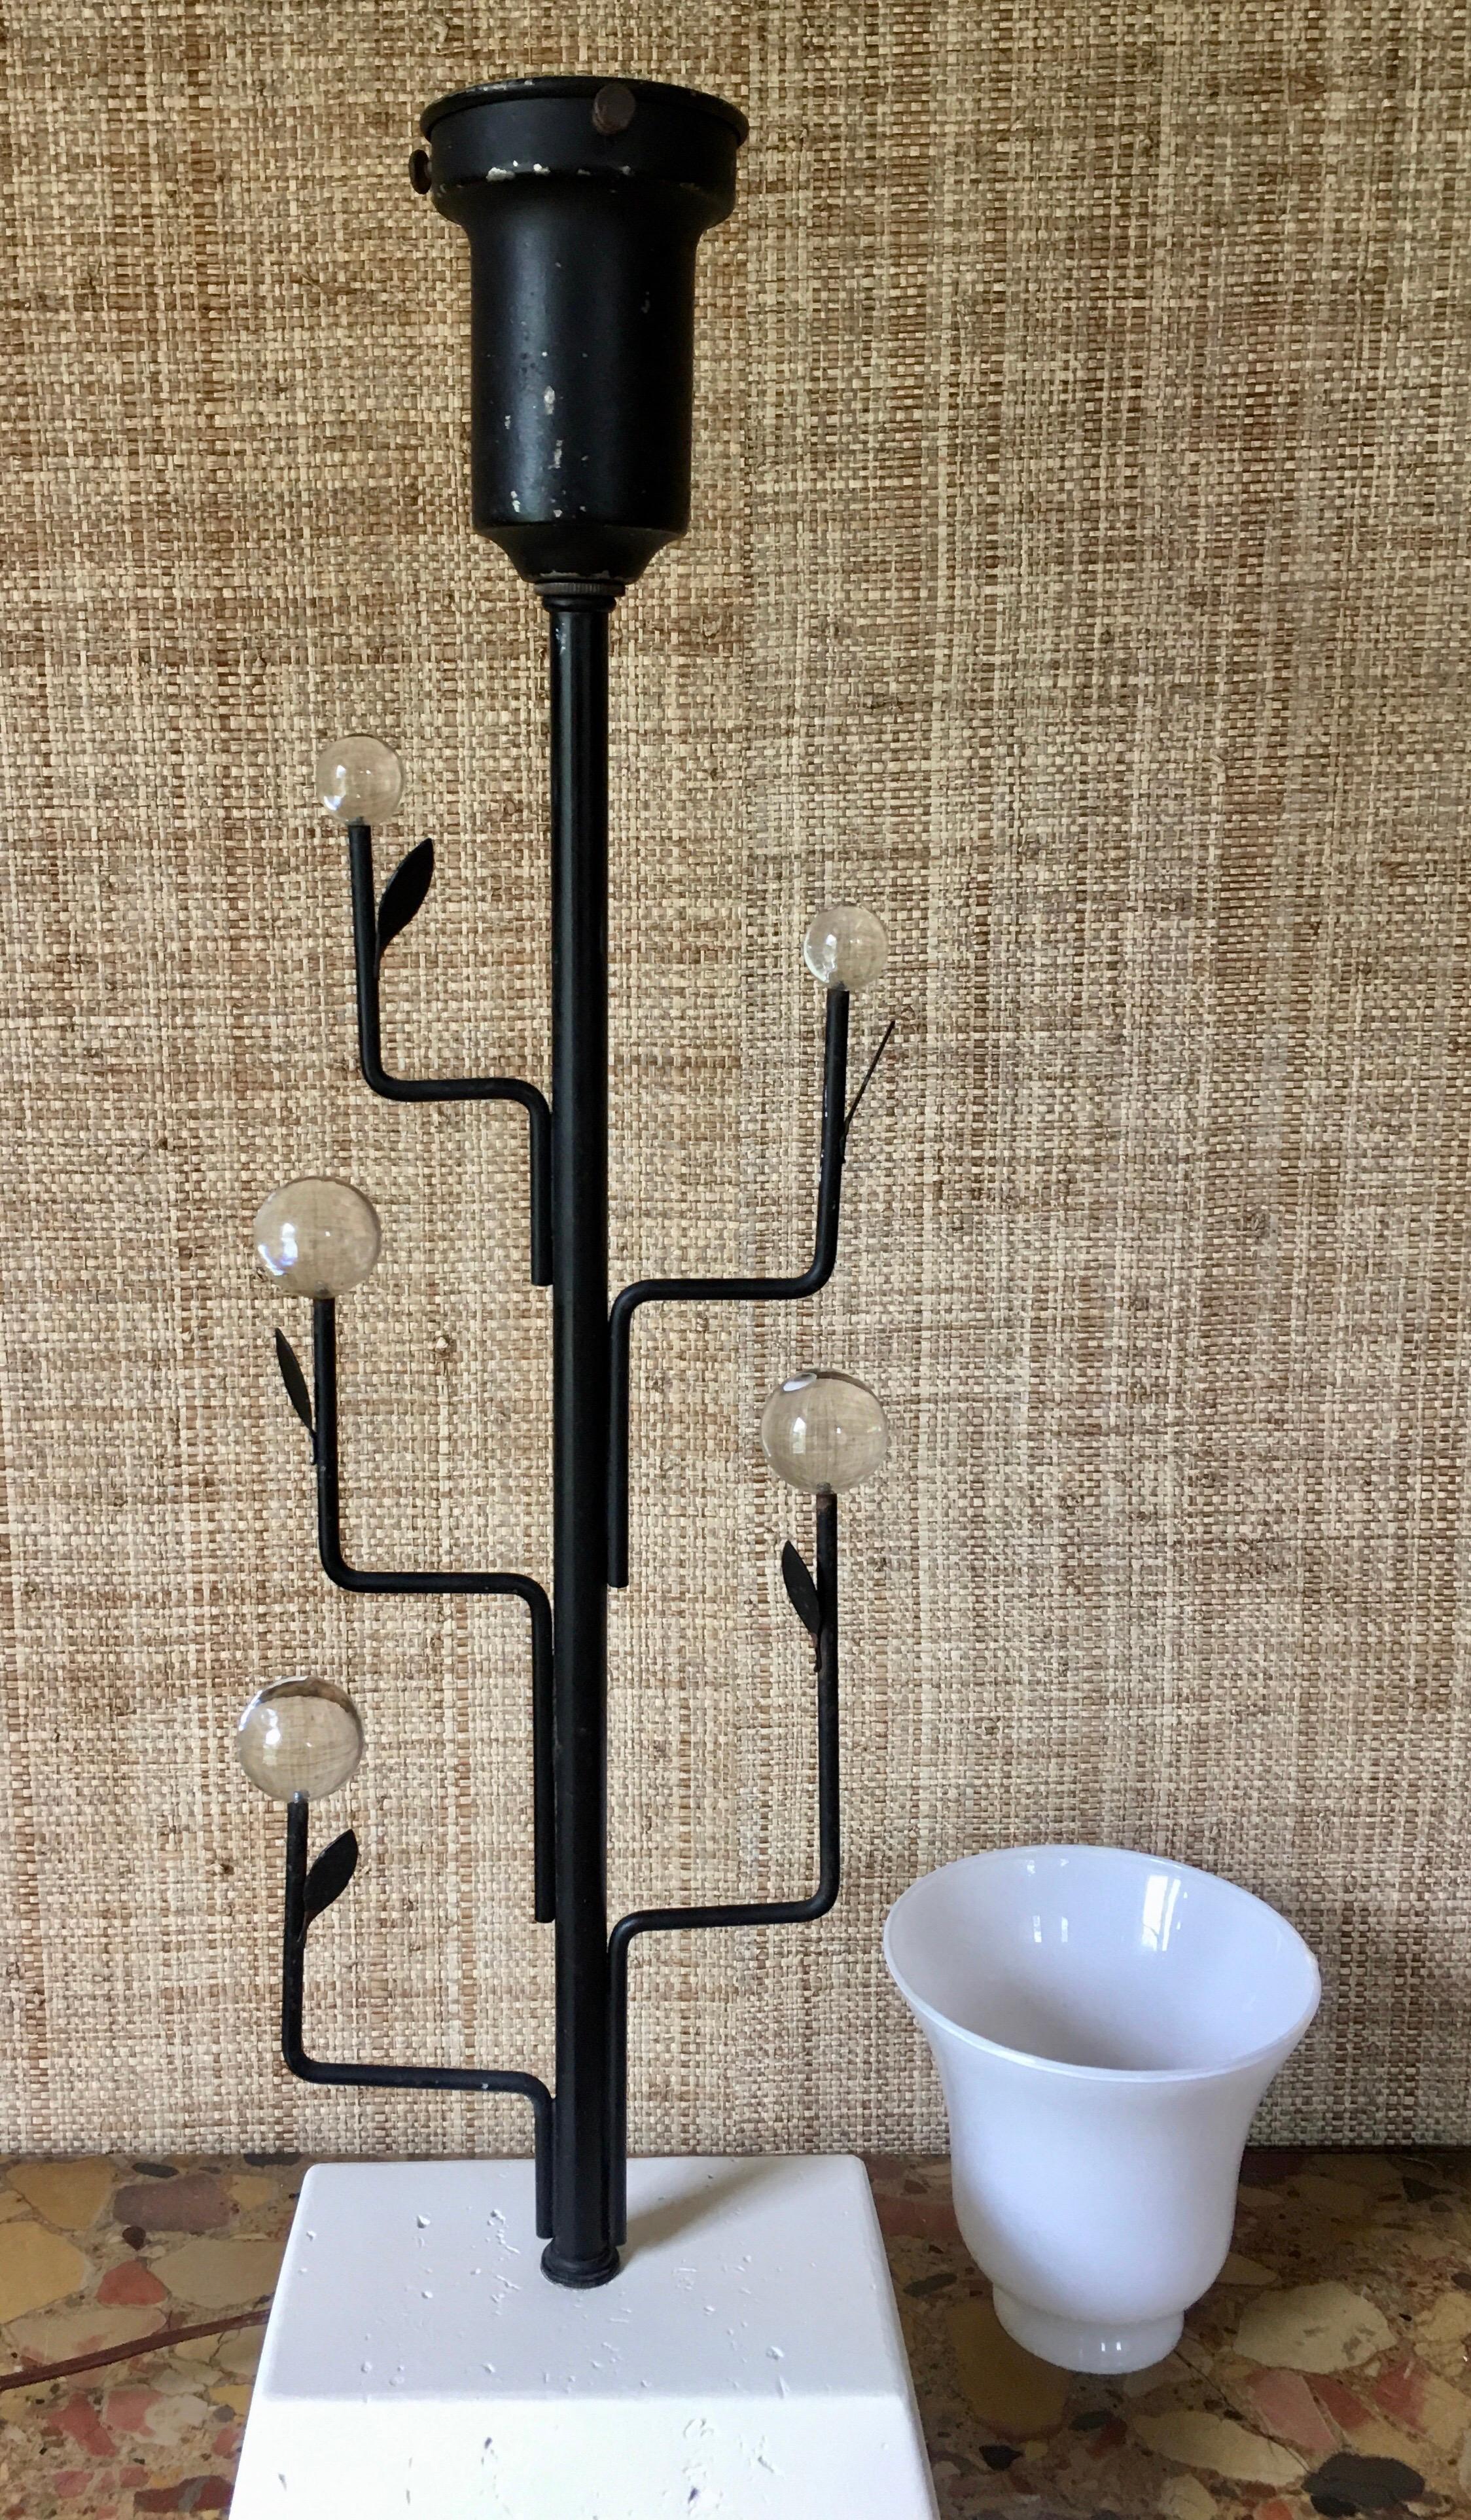 Mid-Century Modern Italian tree form table lamp in the style of Giacometti. Sculptural black iron branches support decorative clear balls. Mounted on a plaster base. Glass shade included. Black lamp shade not included.